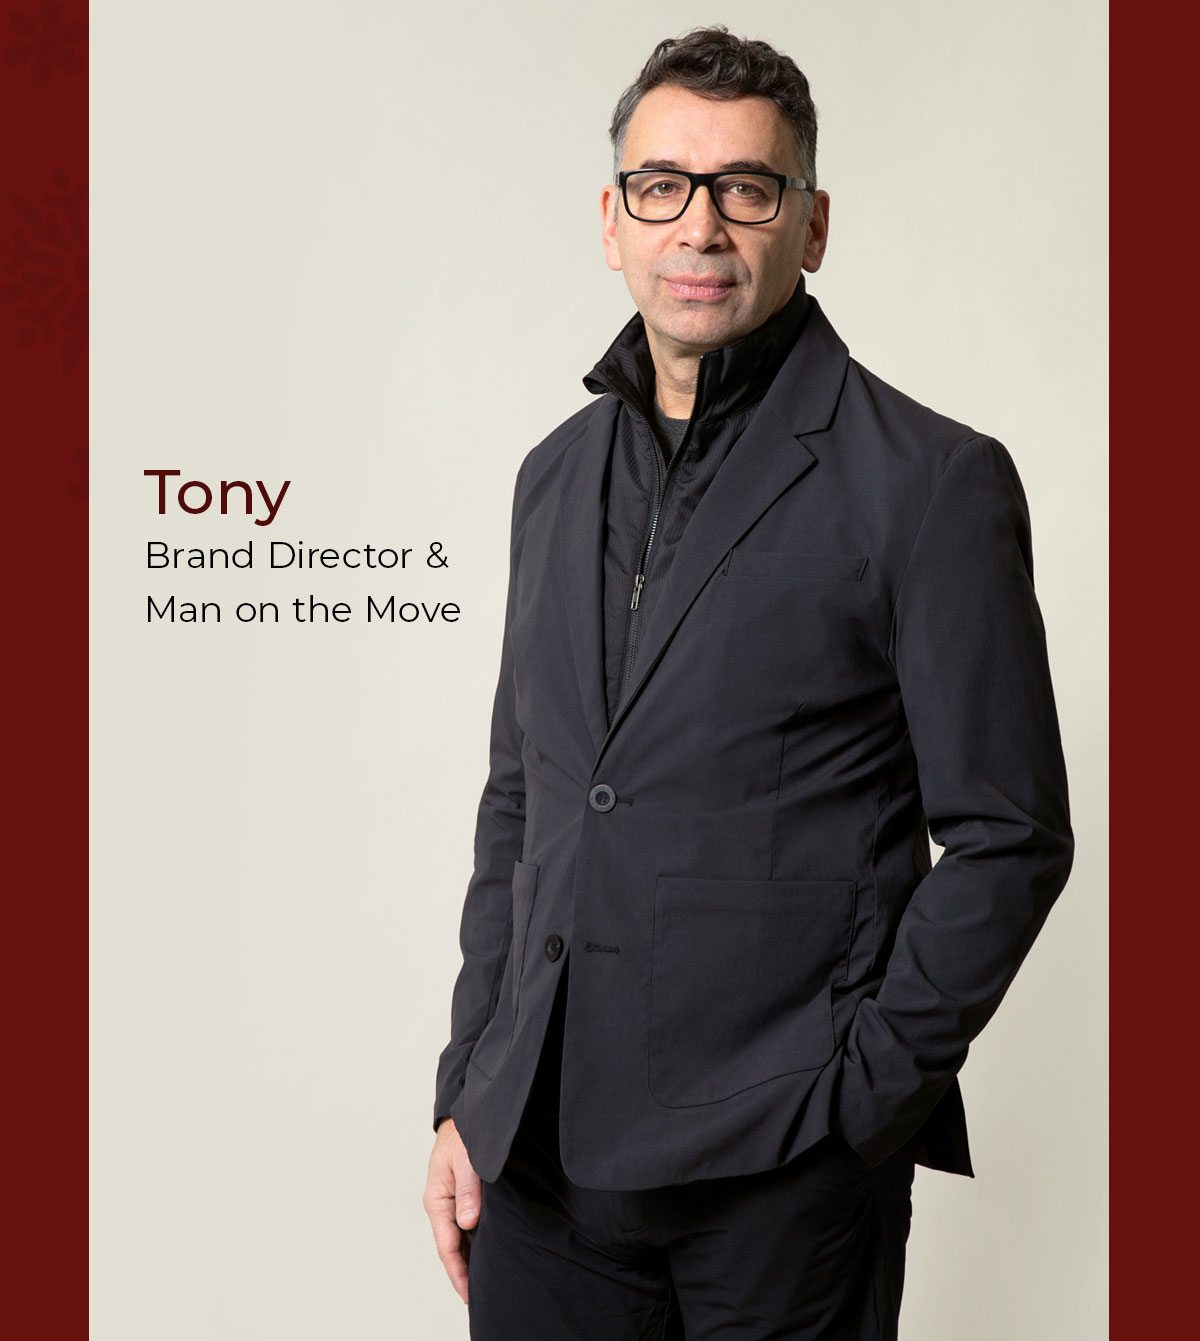 Featuring Tony - Brand Director &Man on the Move